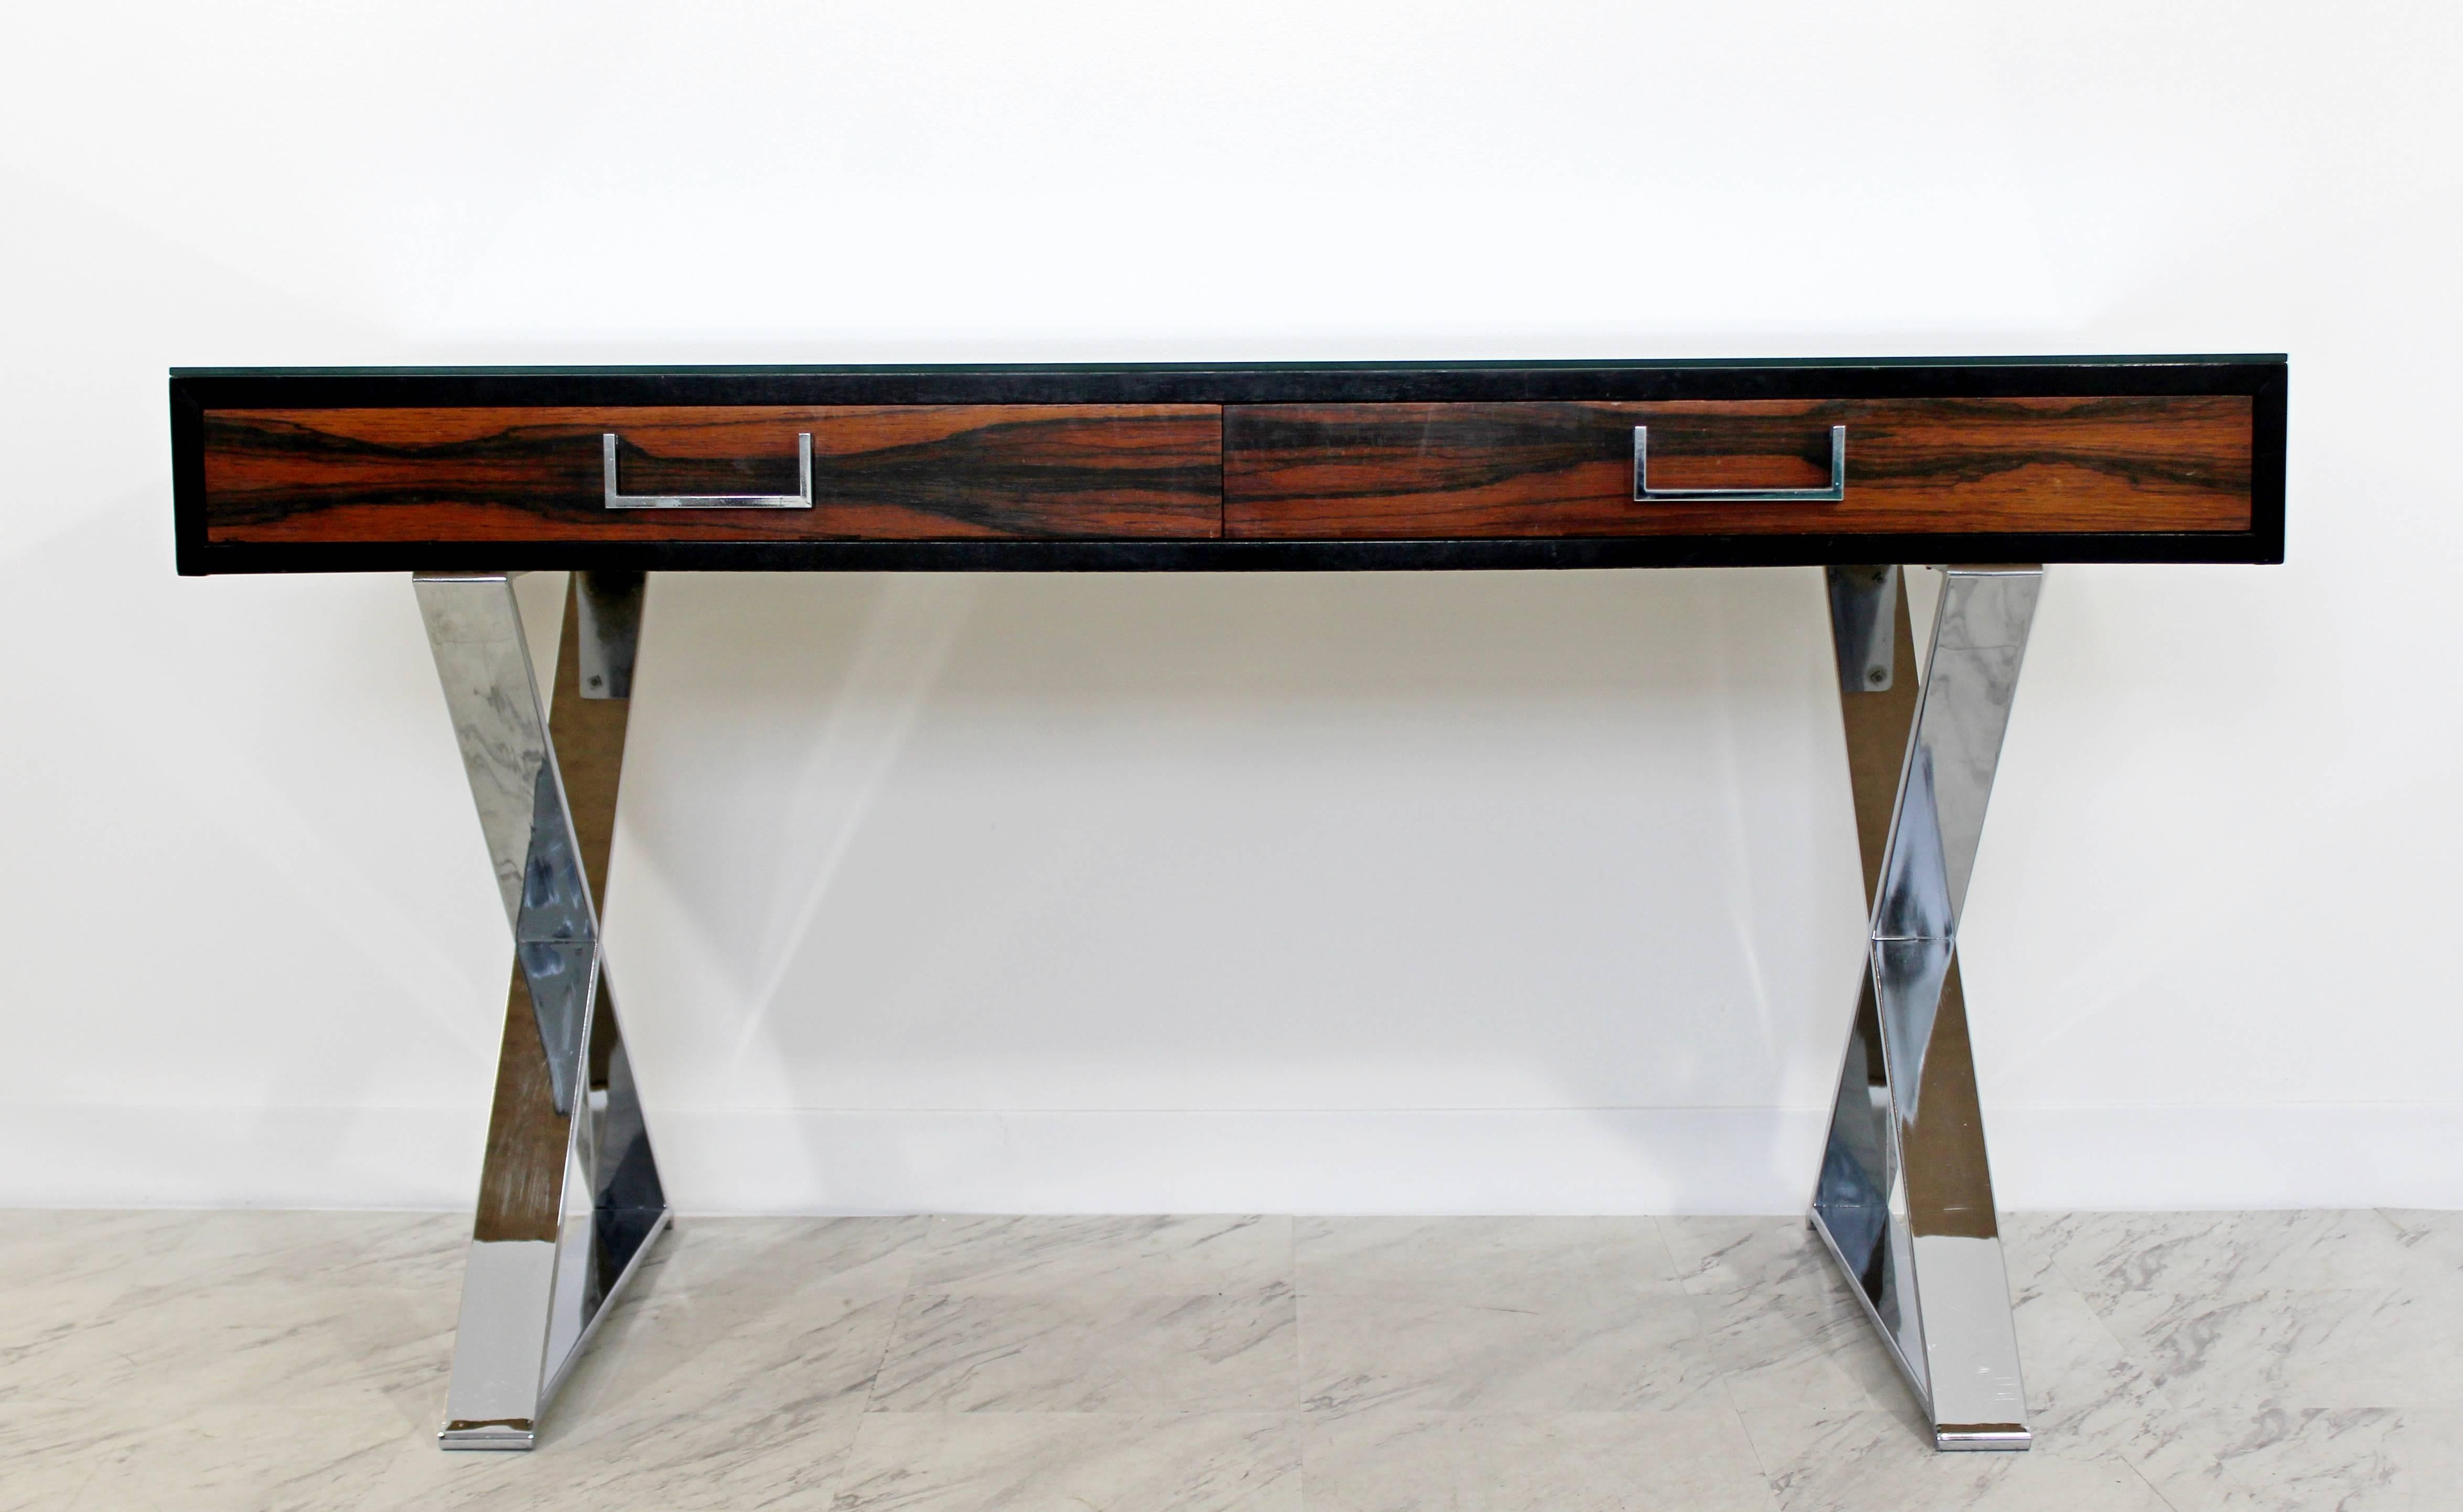 For your consideration is a stunning Campaign desk by Milo Baughman for Thayer Coggin. This black lacquered desk features two spacious rosewood drawers with chrome pulls, a glass top and an 